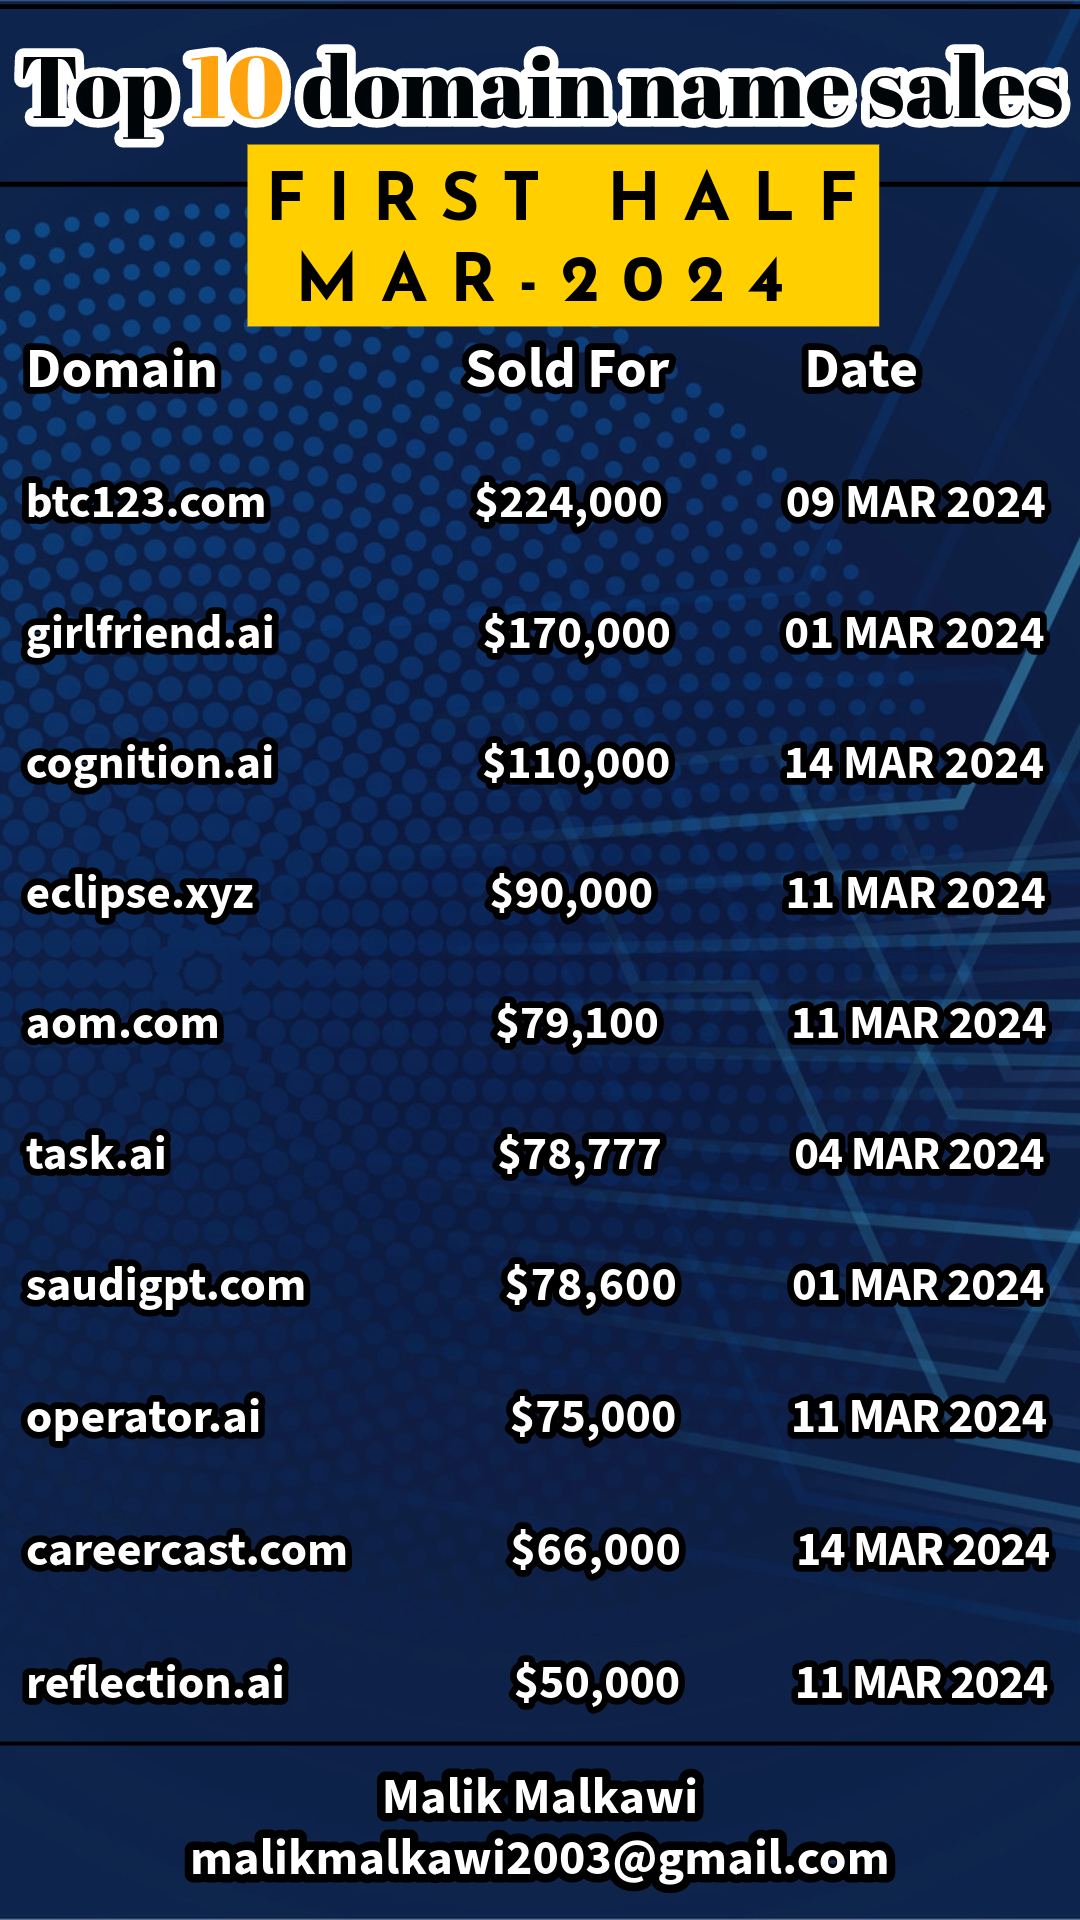 TOP 10 Domains sold (FIRST HALF MAR 2024).png